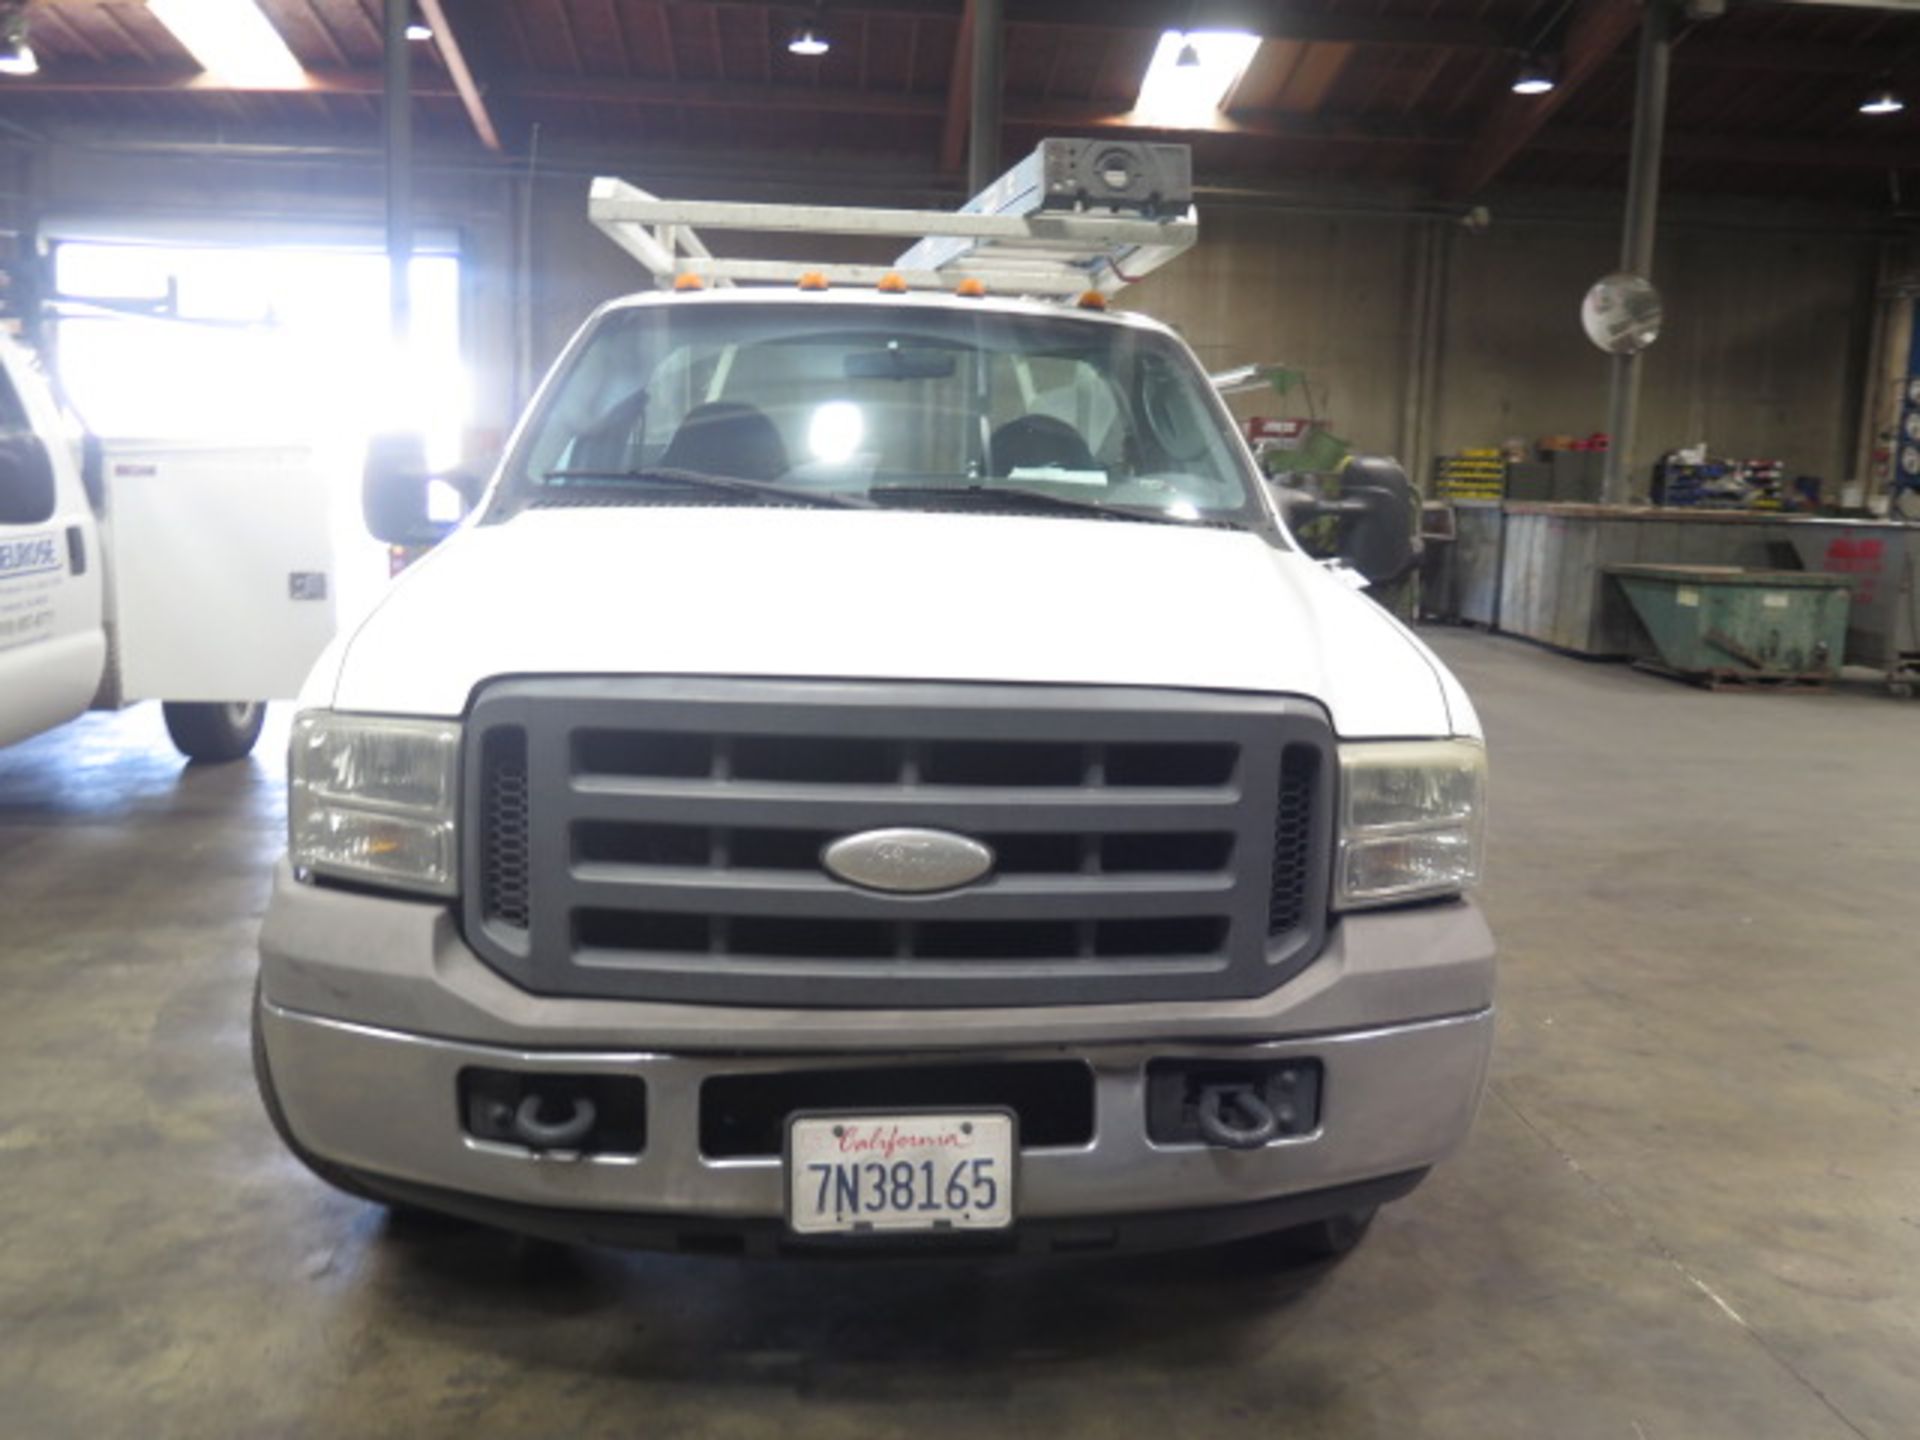 2005 Ford F-350 Service Truck Lisc 7N38165 w/ 6.0L V8 Turbo Diesel Engine, Auto Trans, SOLD AS IS - Image 2 of 23